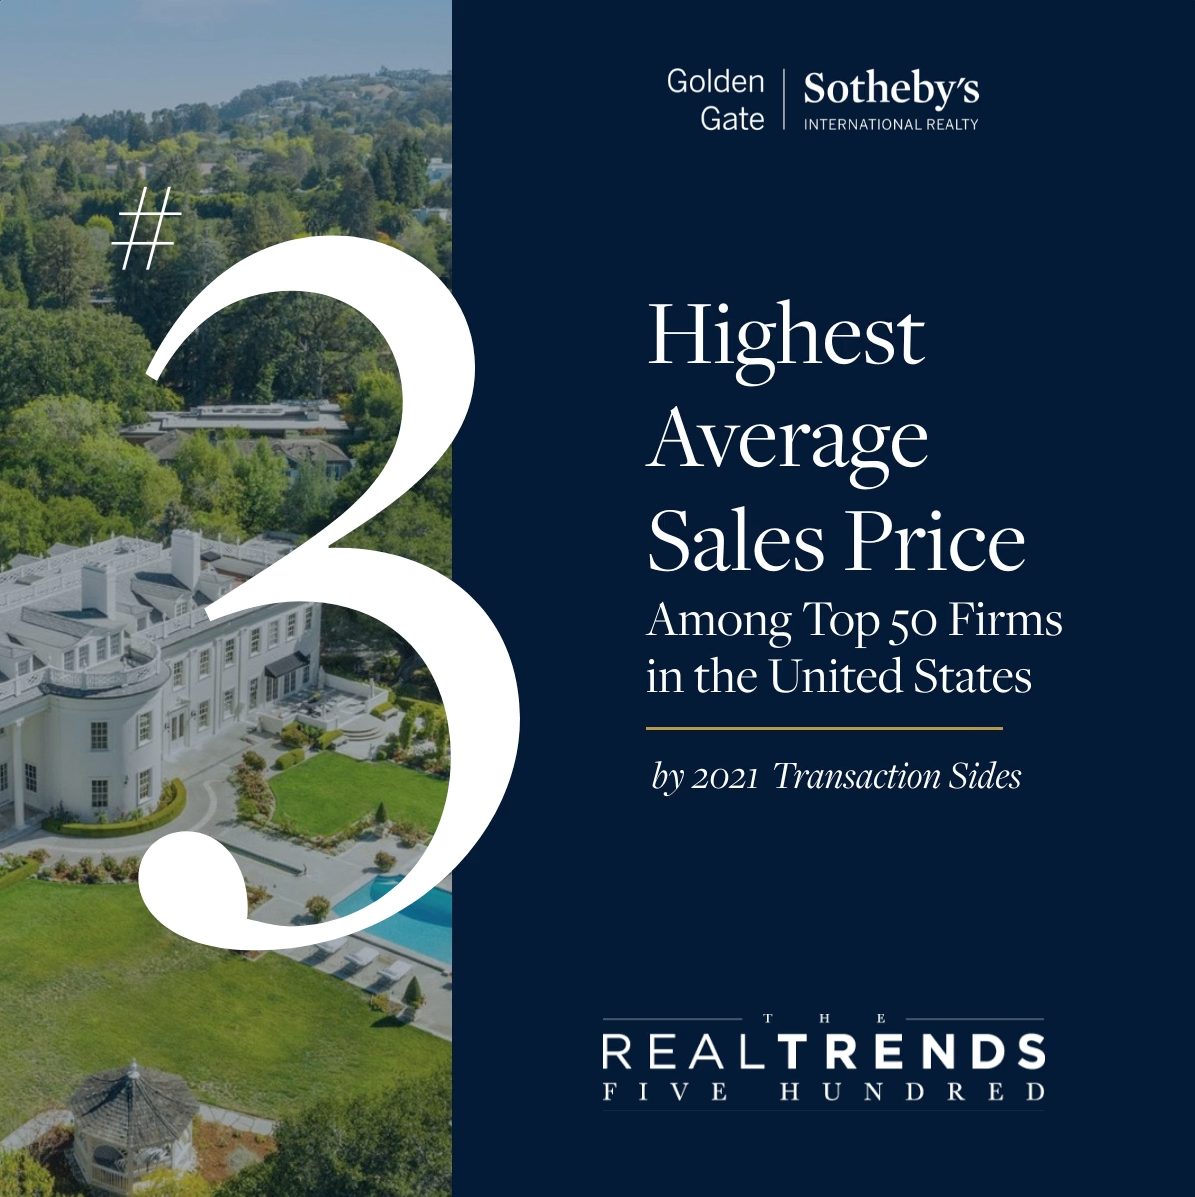 Golden Gate Sotheby's International Realty Ranks No. 3 Among Top 50 Firms in the United States